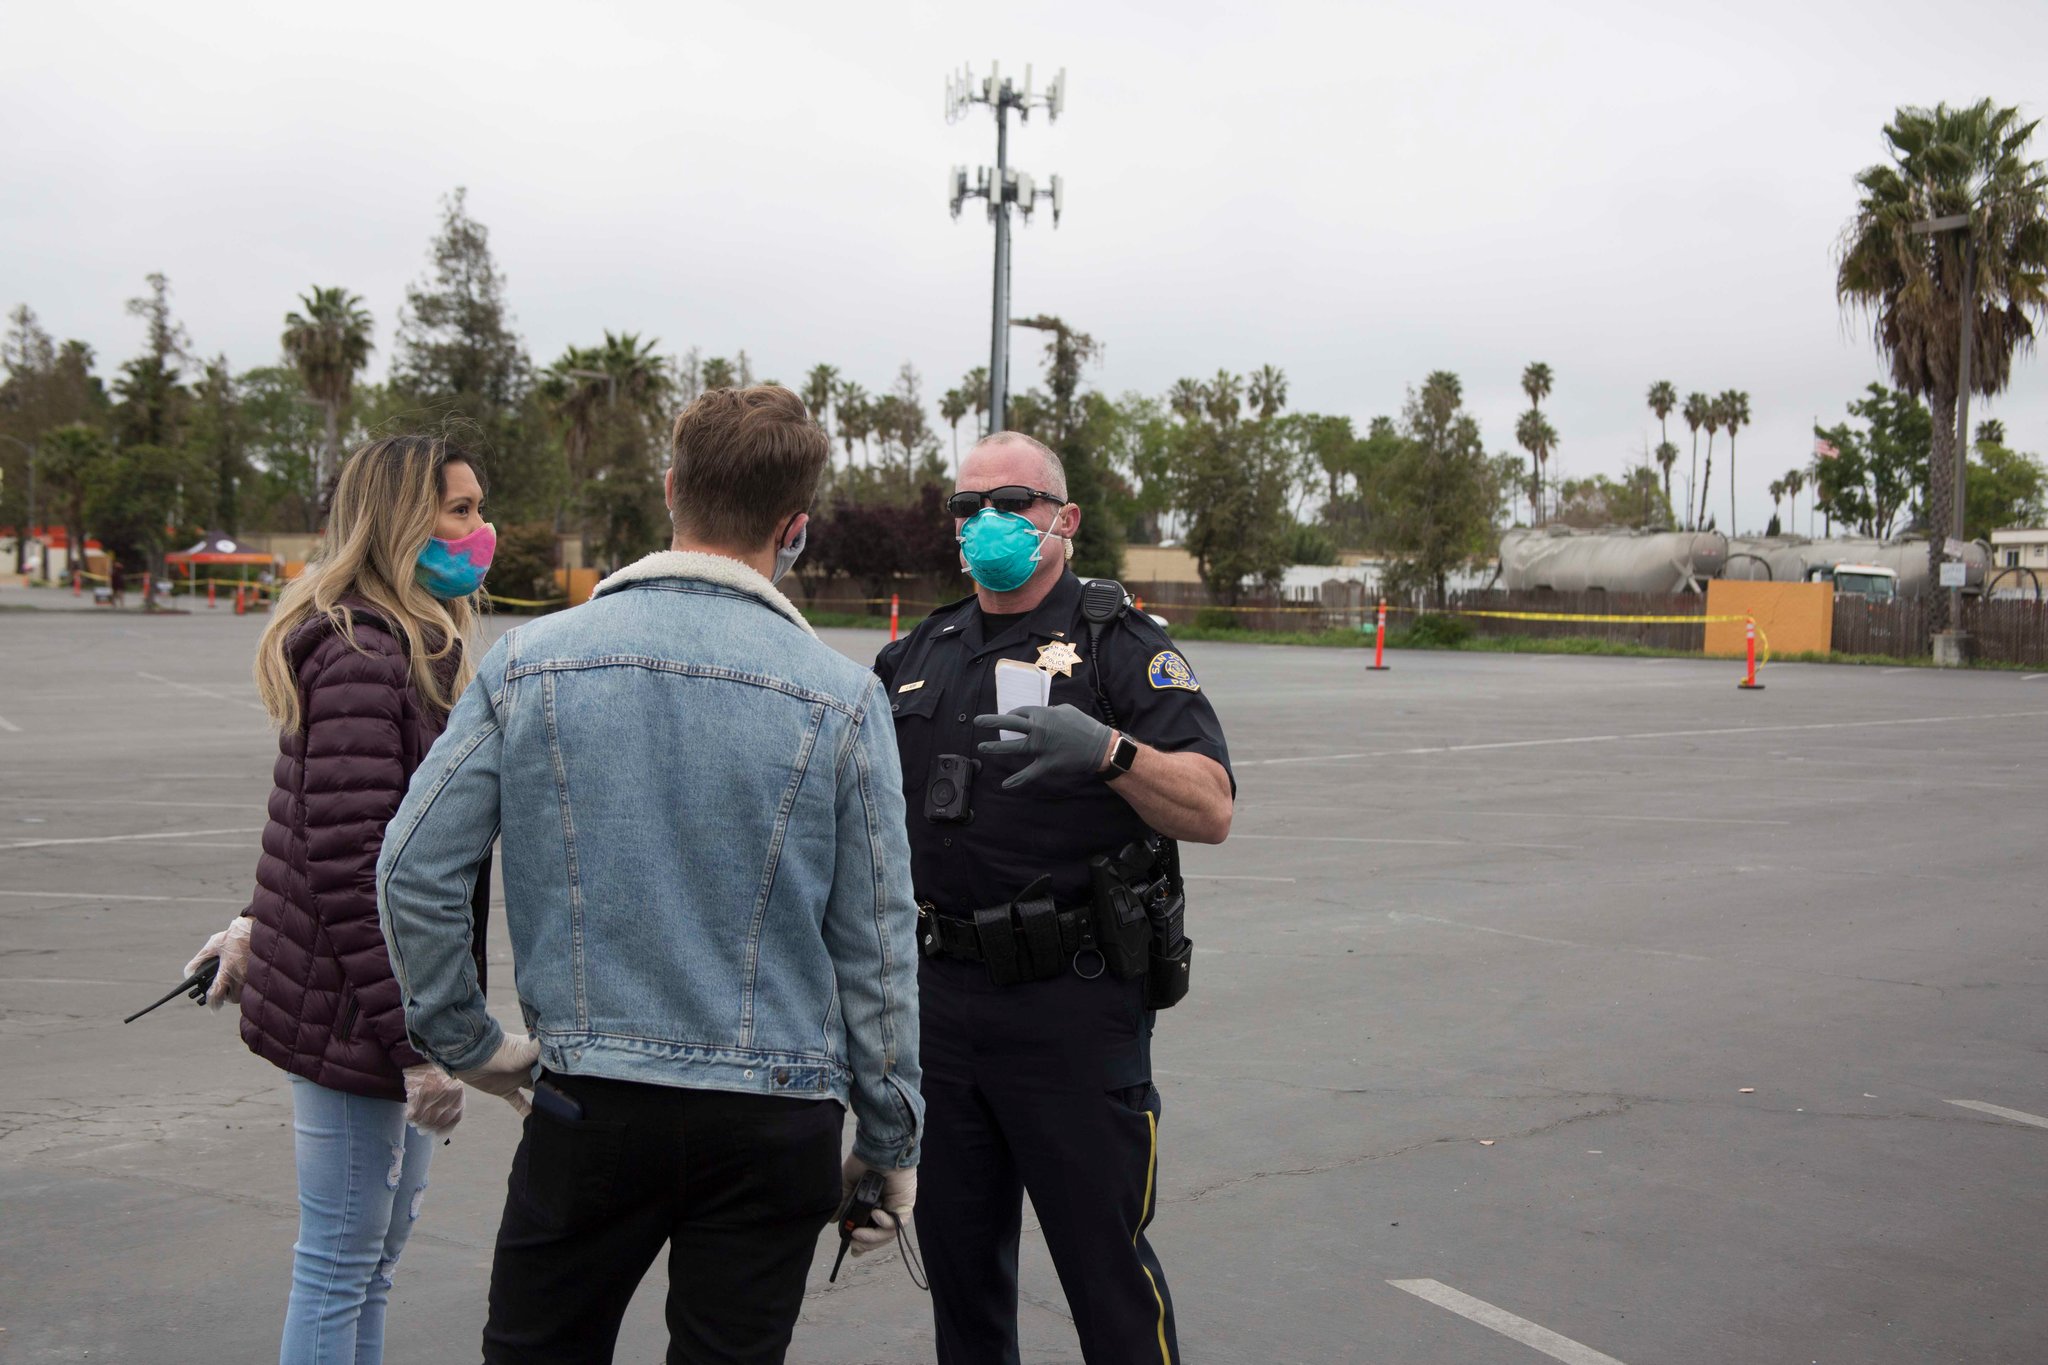 A police officer wearing a face mask and gloves talks to a man and woman, who are also masked, in an almost empty parking lot. Trees and structures form the backdrop as the scene unfolds, capturing a moment that could easily be featured in Berkeley Journalism coverage.